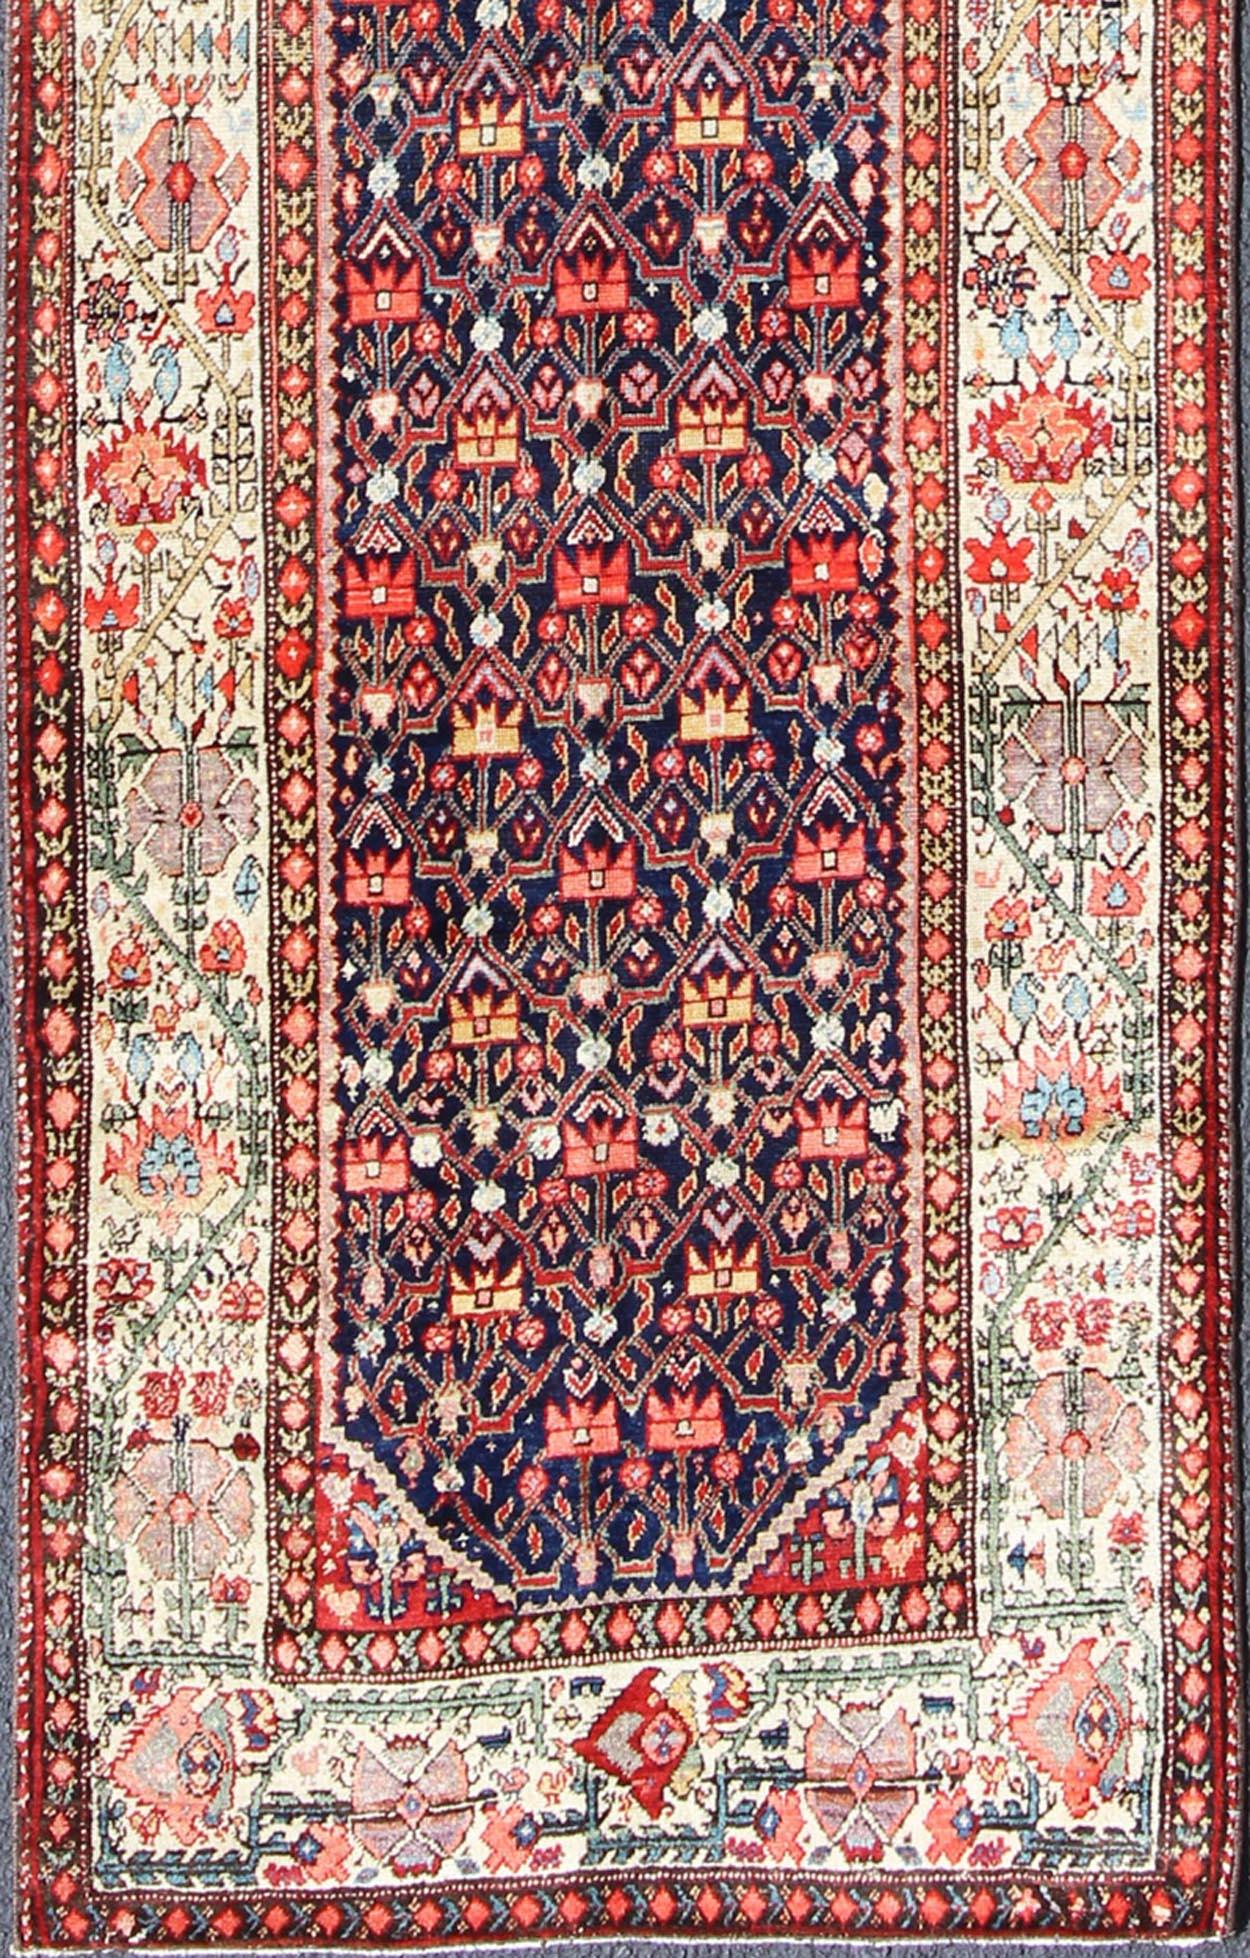 Red, blue, ivory, peach, mint and multicolored Persian antique Long Malayer Runner with geometric floral design, kwarugs/ ema-7521, country of origin / type: Iran / Malayer, circa 1920

This antique Persian Malayer runner, circa early 20th